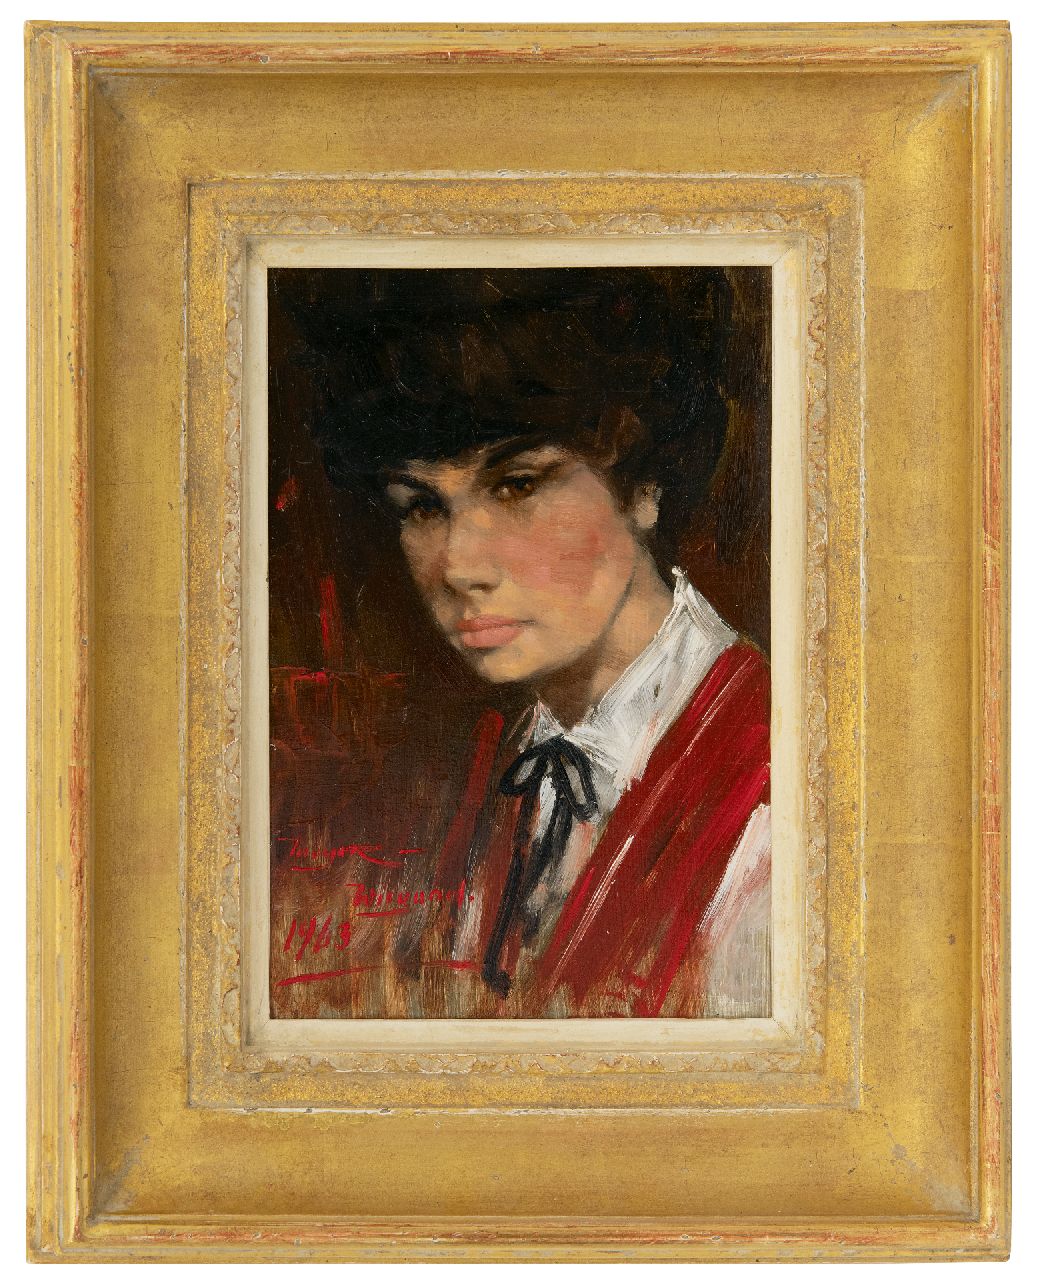 Meyer-Wiegand R.D.  | Rolf Dieter Meyer-Wiegand | Paintings offered for sale | Portrait of young woman, oil on panel 15.1 x 21.0 cm, signed l.l. and dated 1963